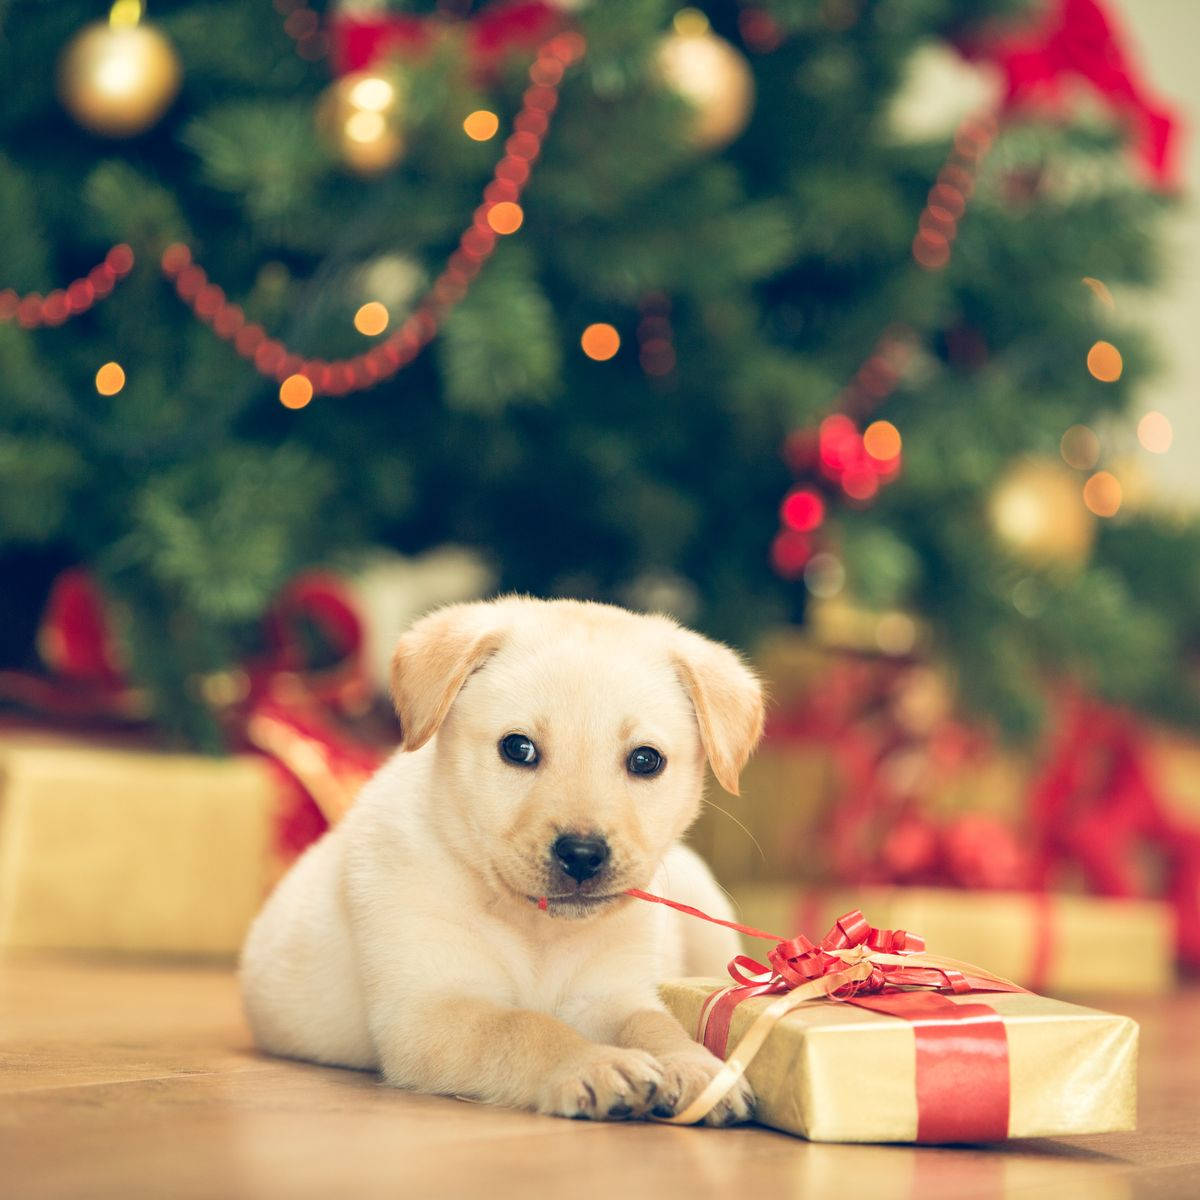 Puppy And Christmas Present